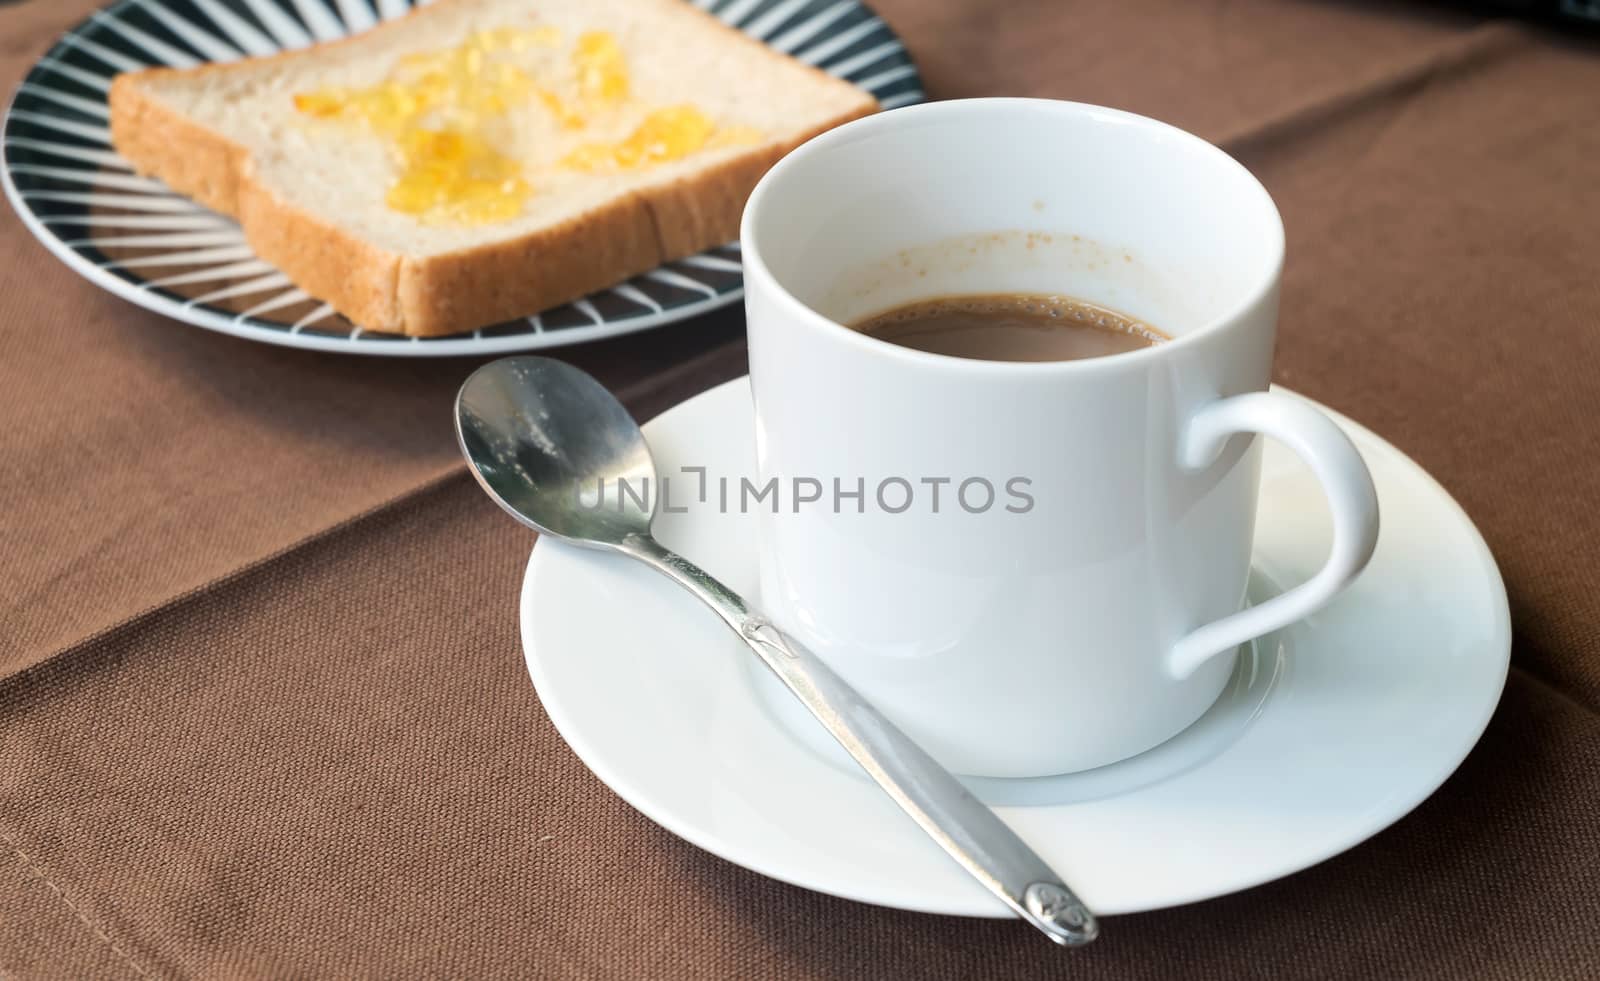 Bread and coffee on the table.